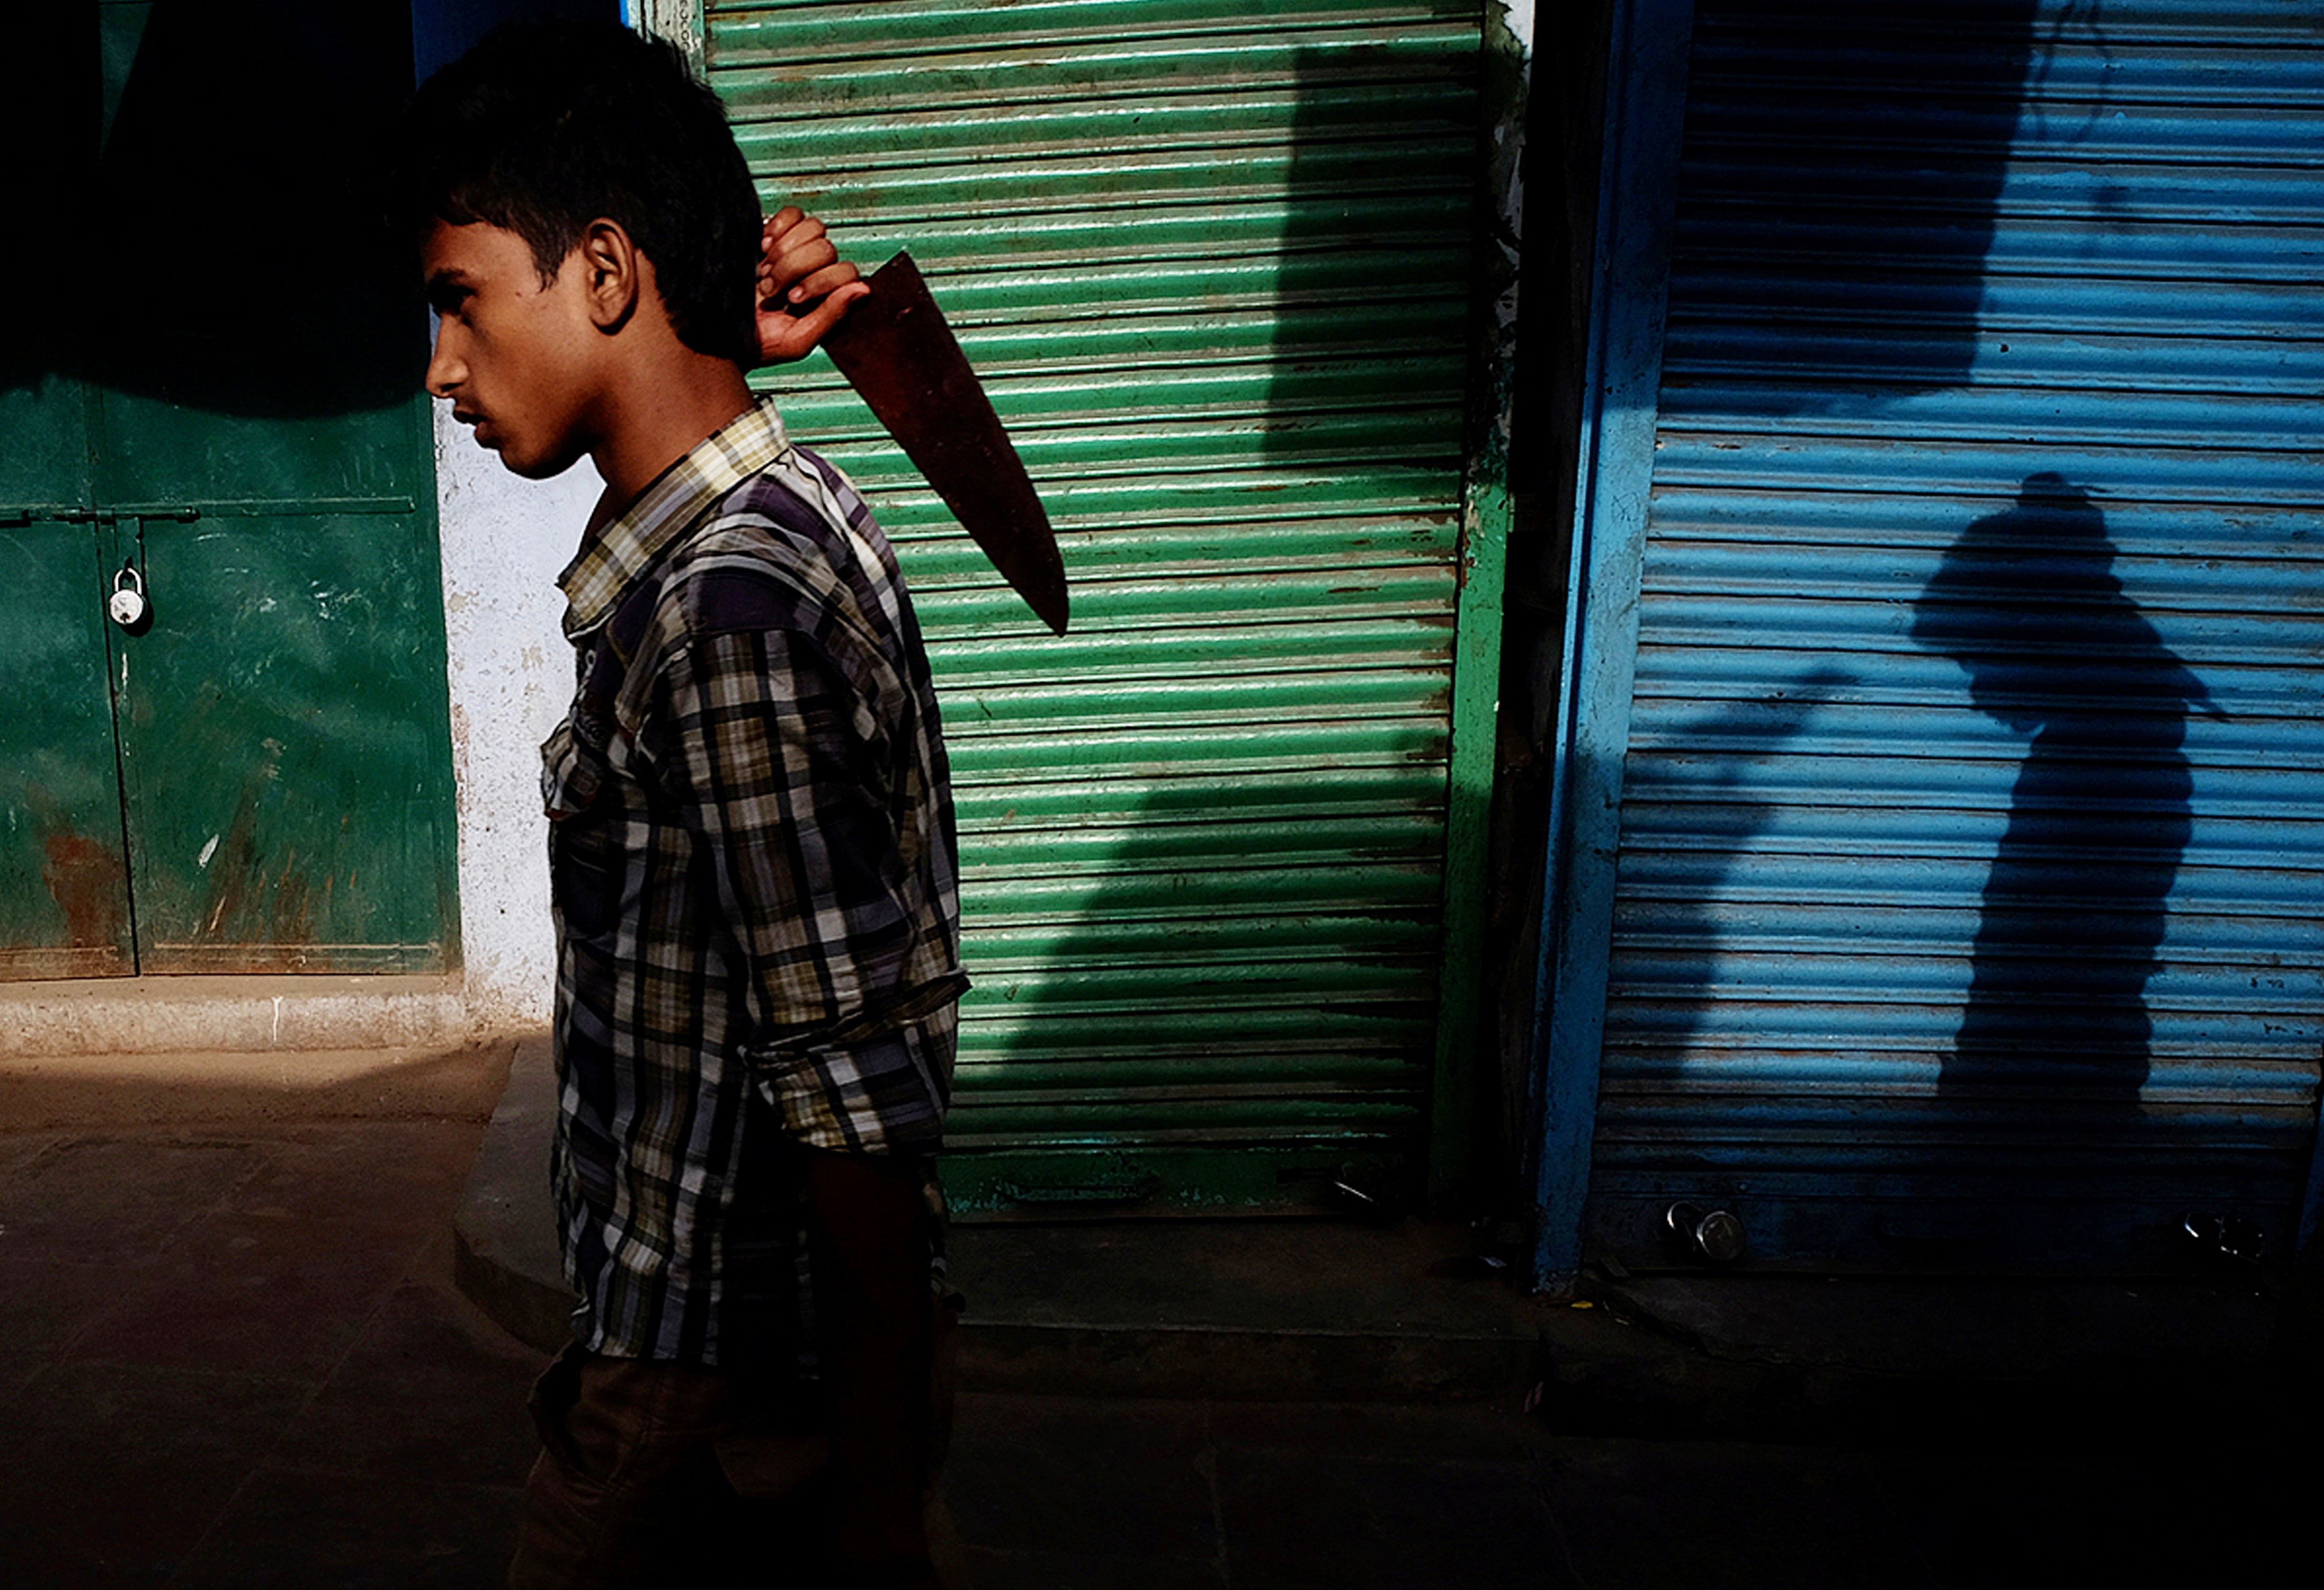 VINEET VOHRA'S A - Z GUIDE TO STREET PHOTOGRAPHY